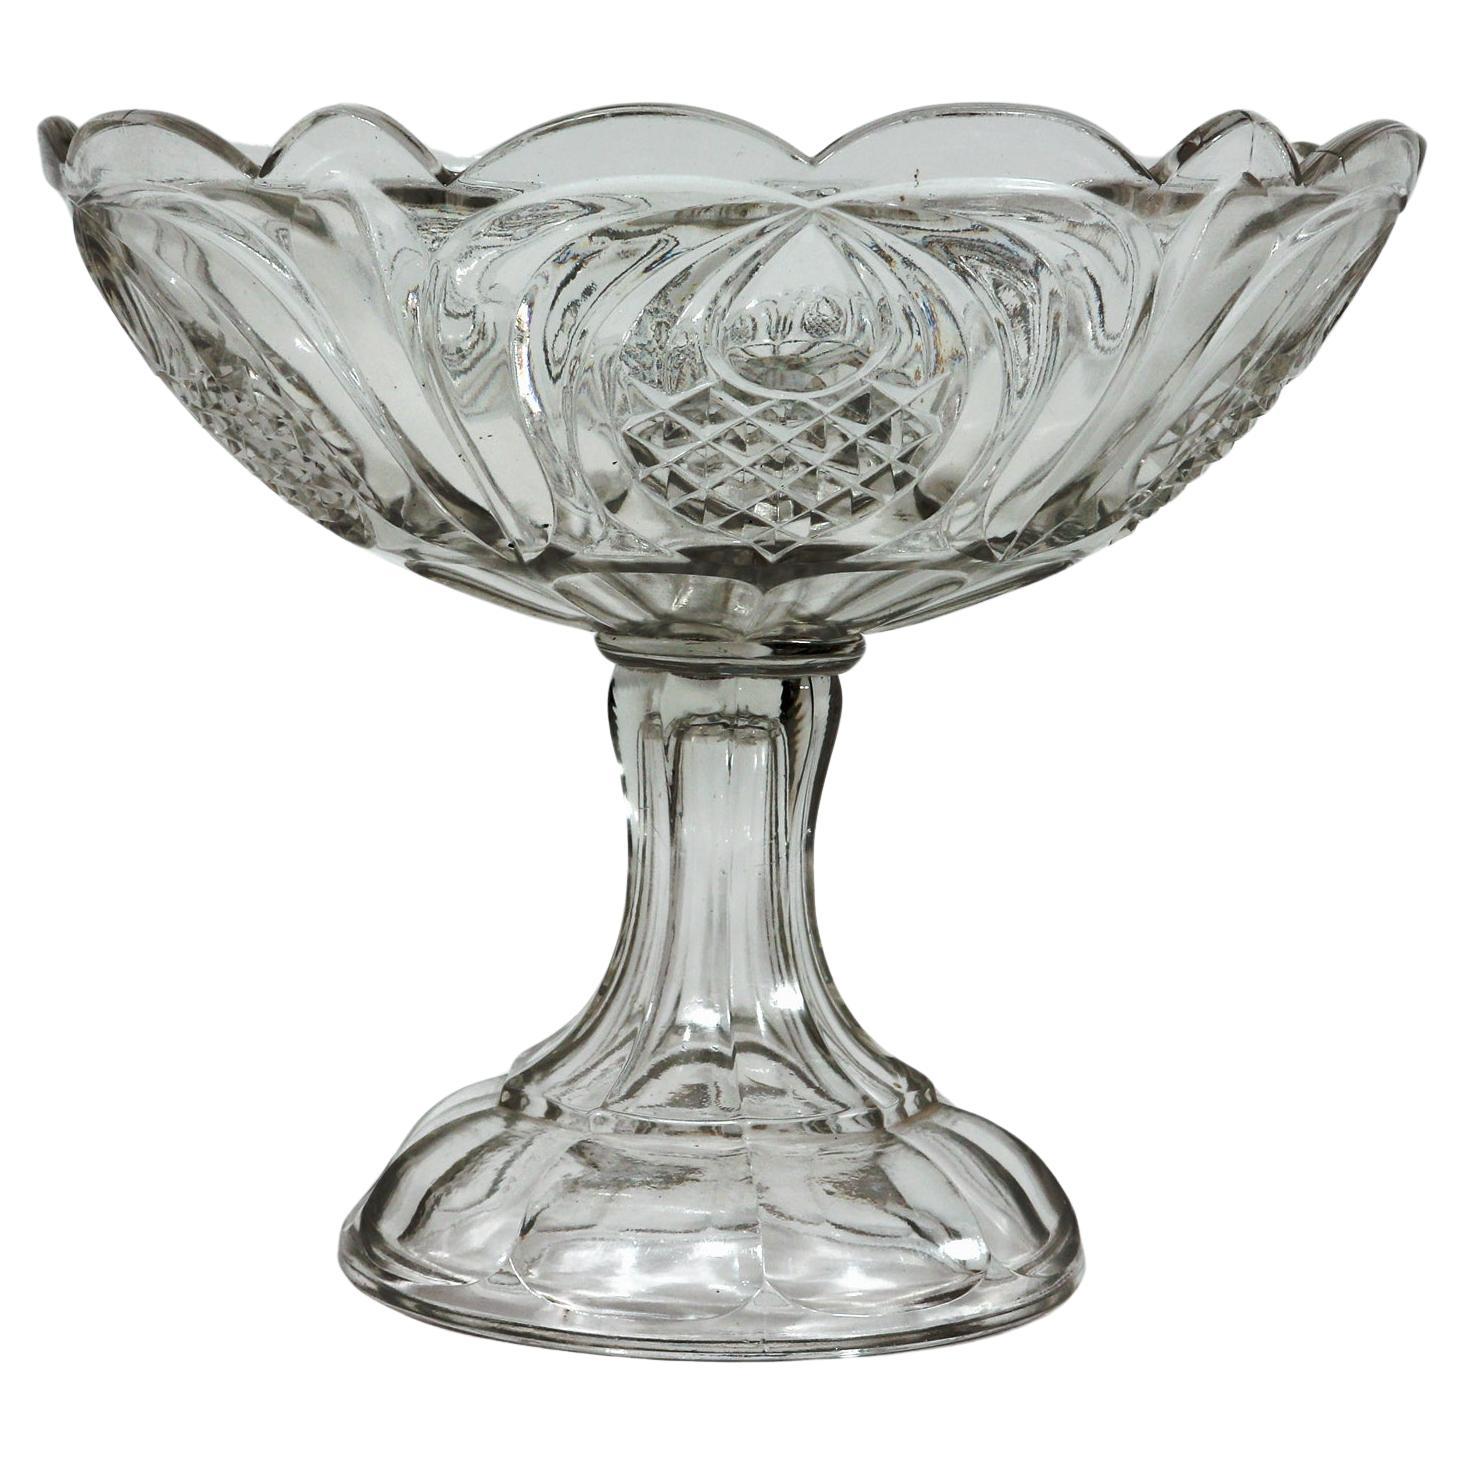 Boston & Sandwich American Pressed Glass Compote with Pineapple Pattern For Sale